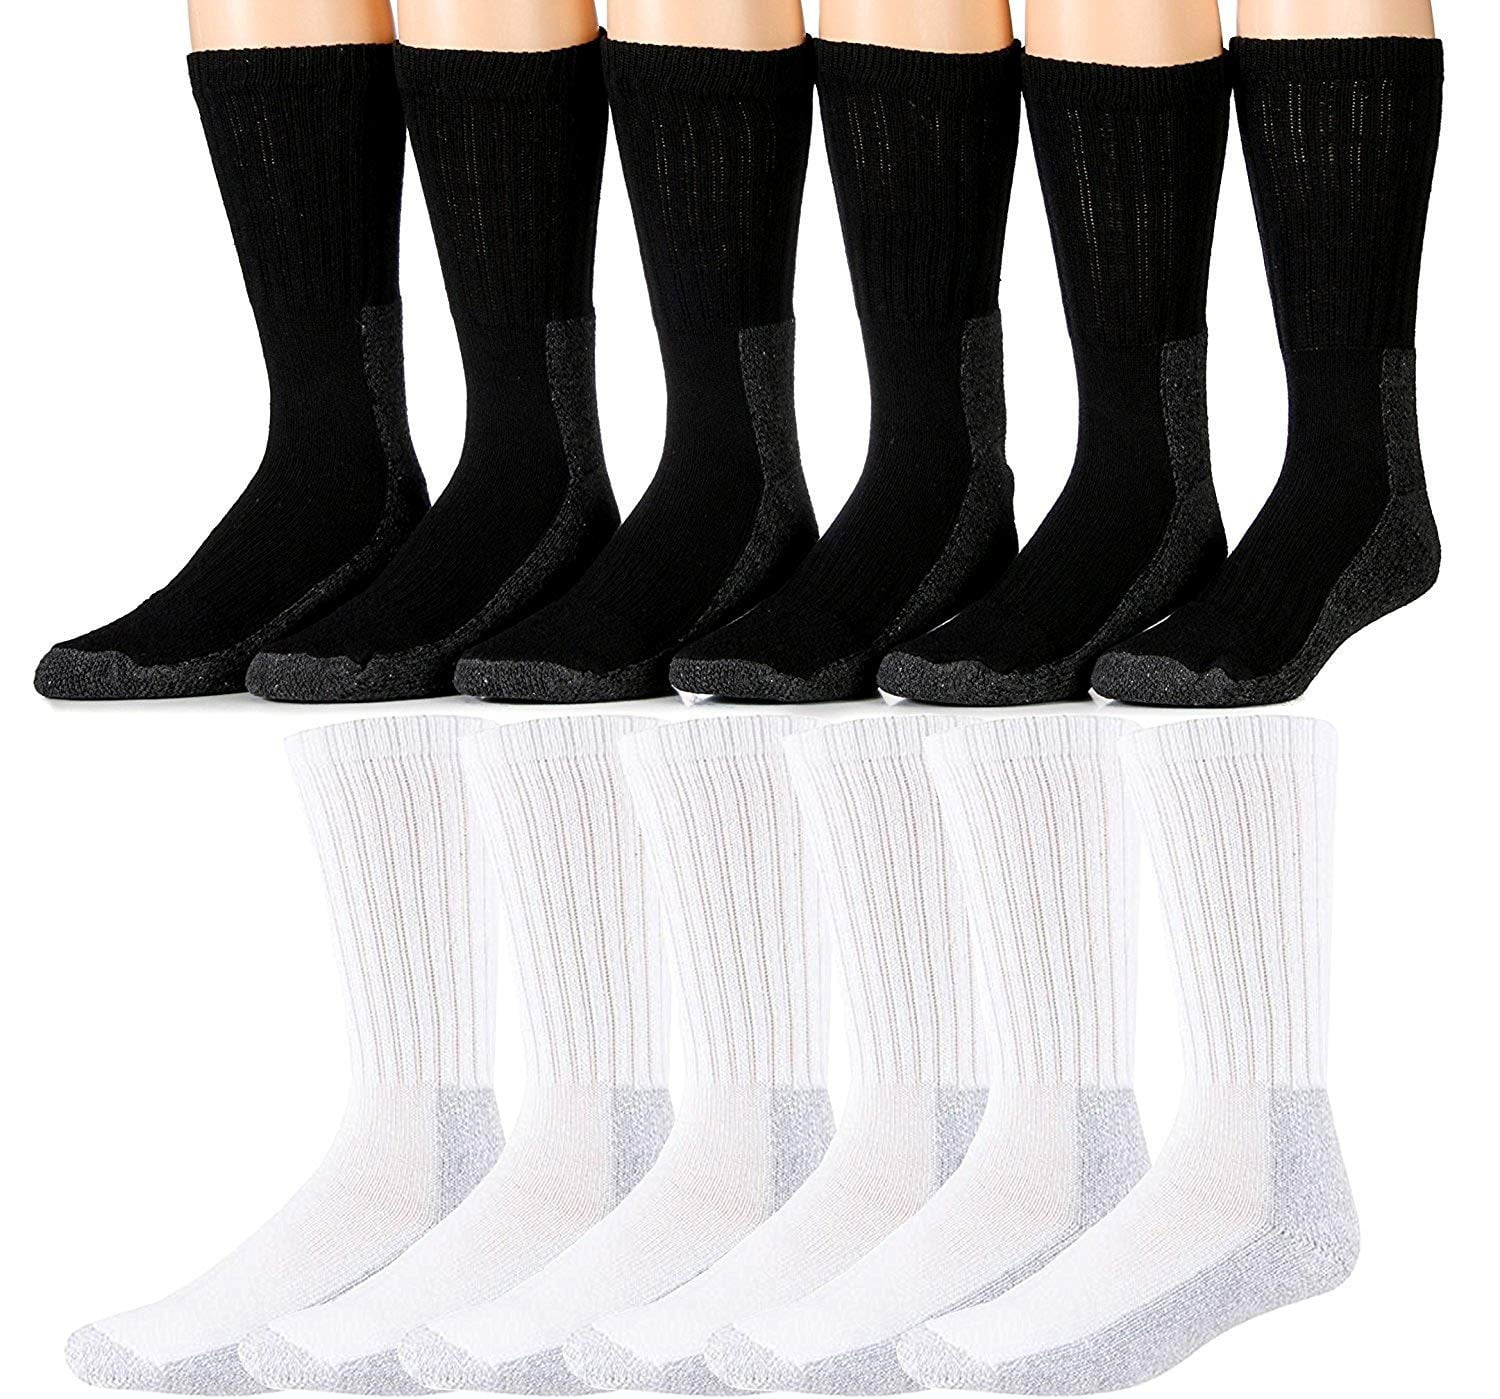 thick socks for mens boots